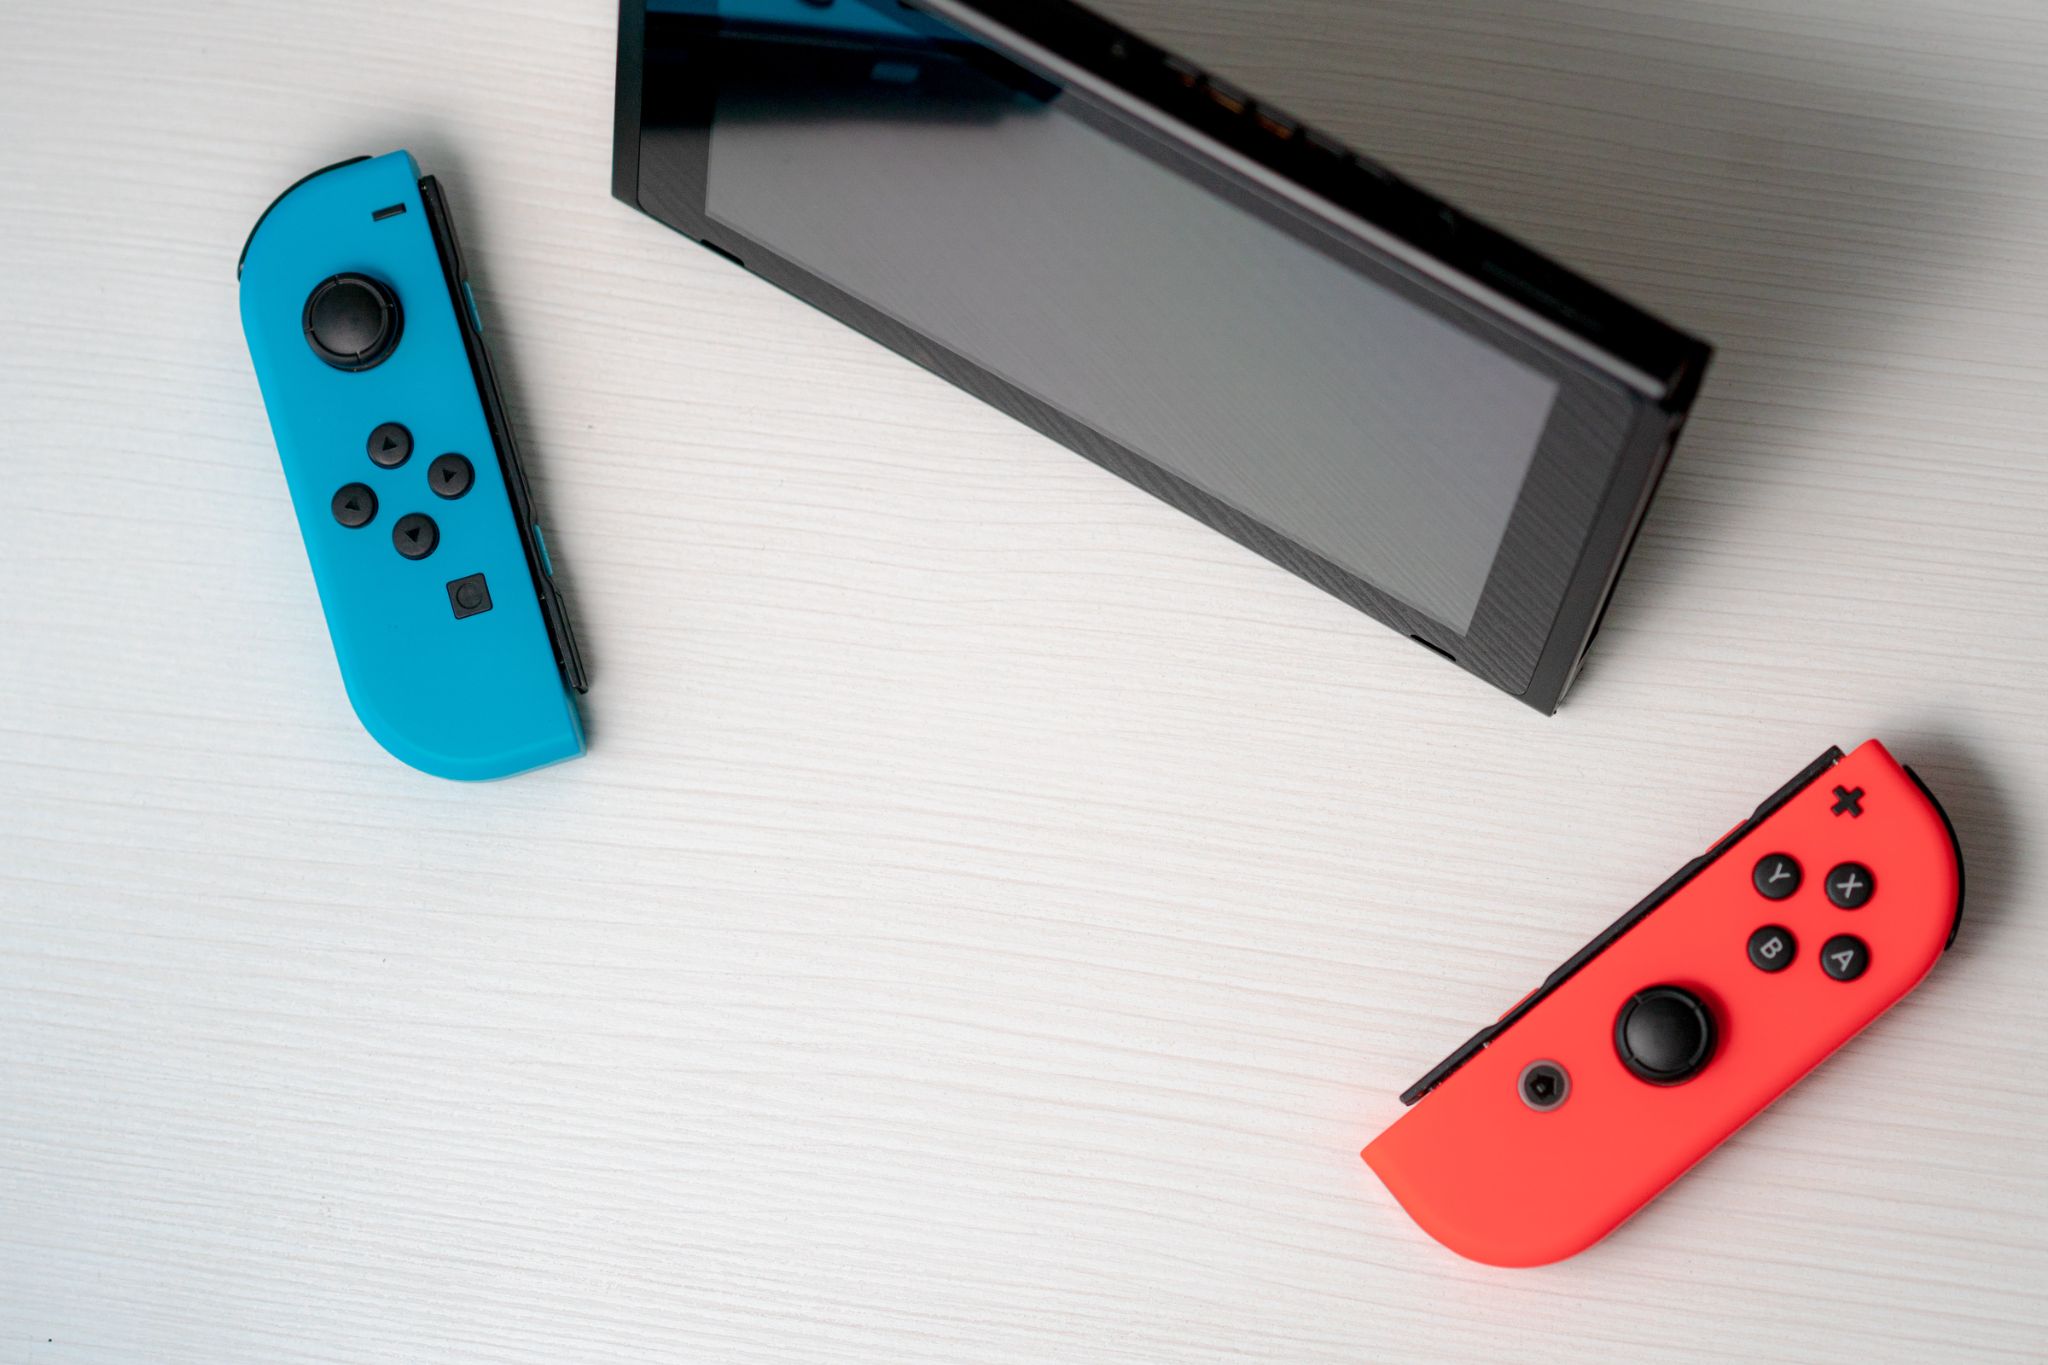 A Nintendo Switch screen and game controls against a white background.